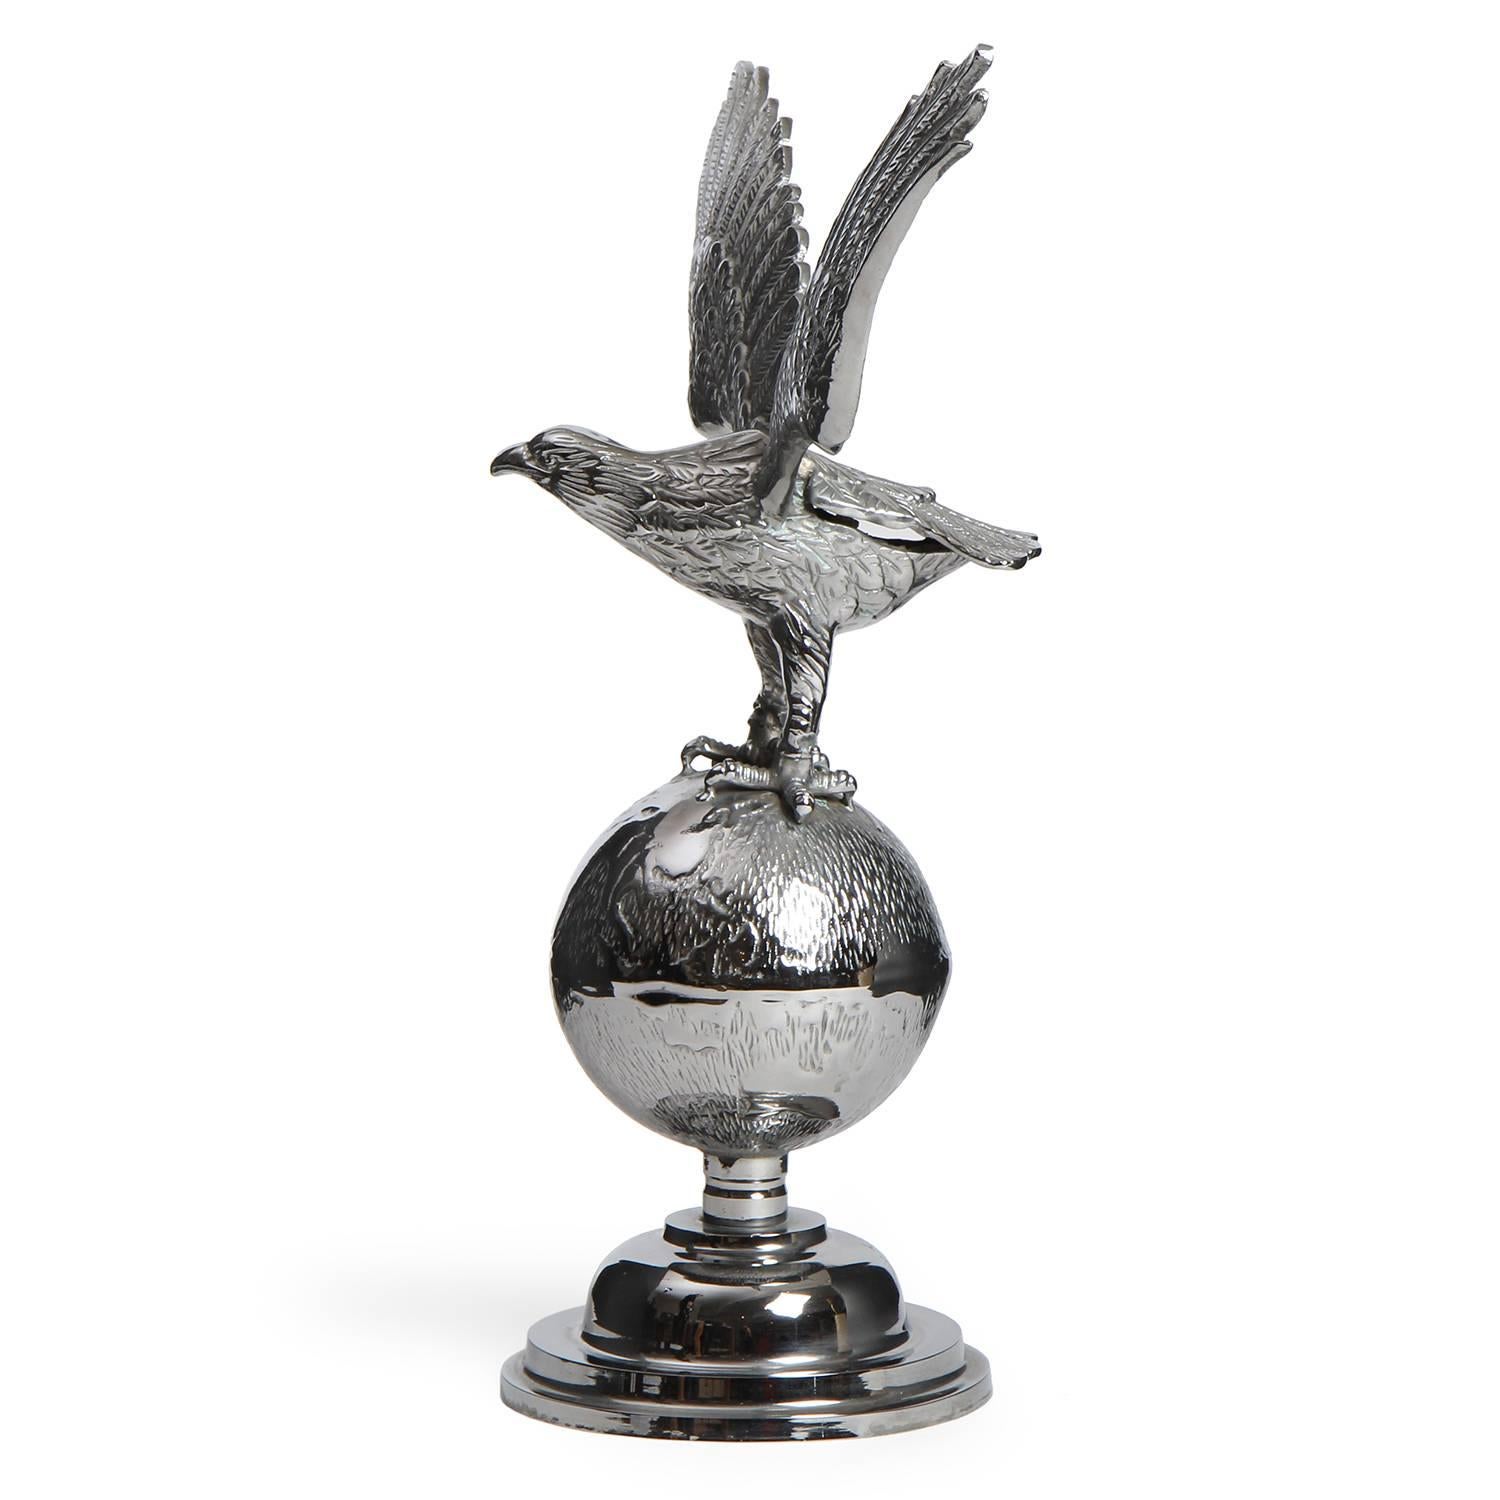 A finely detailed and naturalistically modeled eagle dramatically perched atop a globe mounted on a stepped base, the entire form rendered in chromed steel.